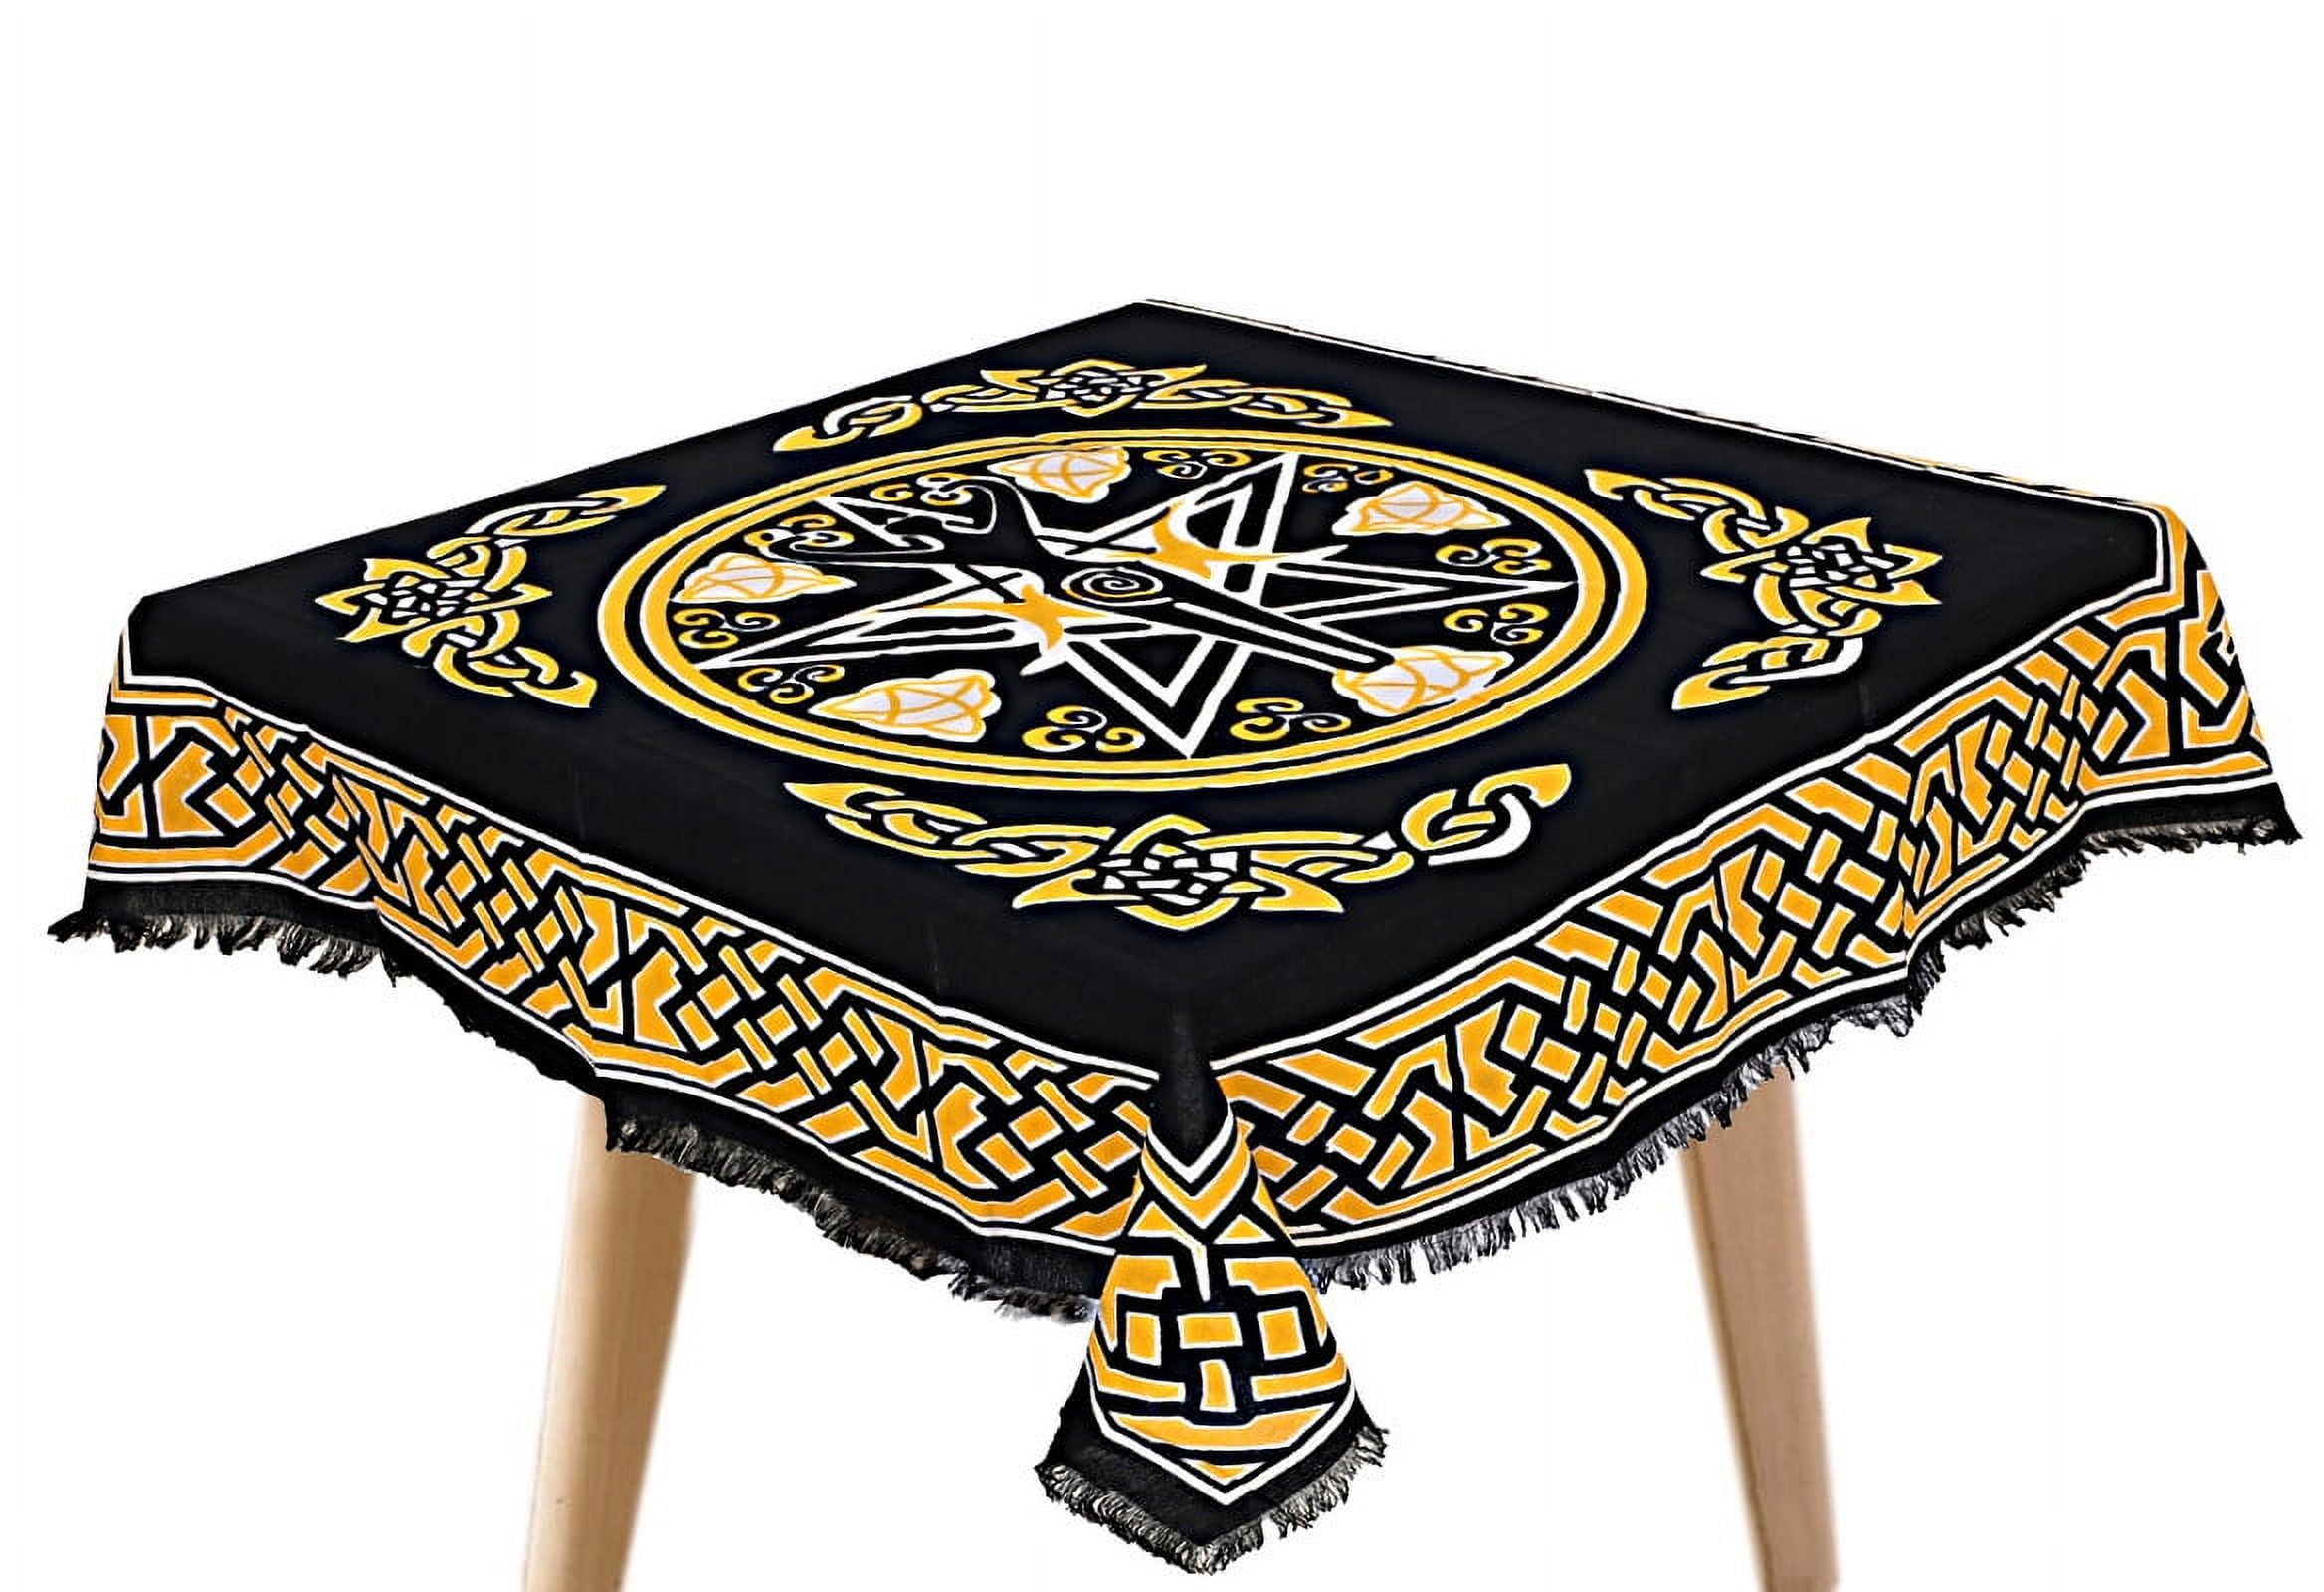 THE ART BOX Altar Cloth Tarot Cards Table Napkins Witchcraft Supplies Black  Gold Tablecloth Square Spiritual Celestial Deck Cloth With Fringes ,  Pentagram Goddess , 24X24 Inches 